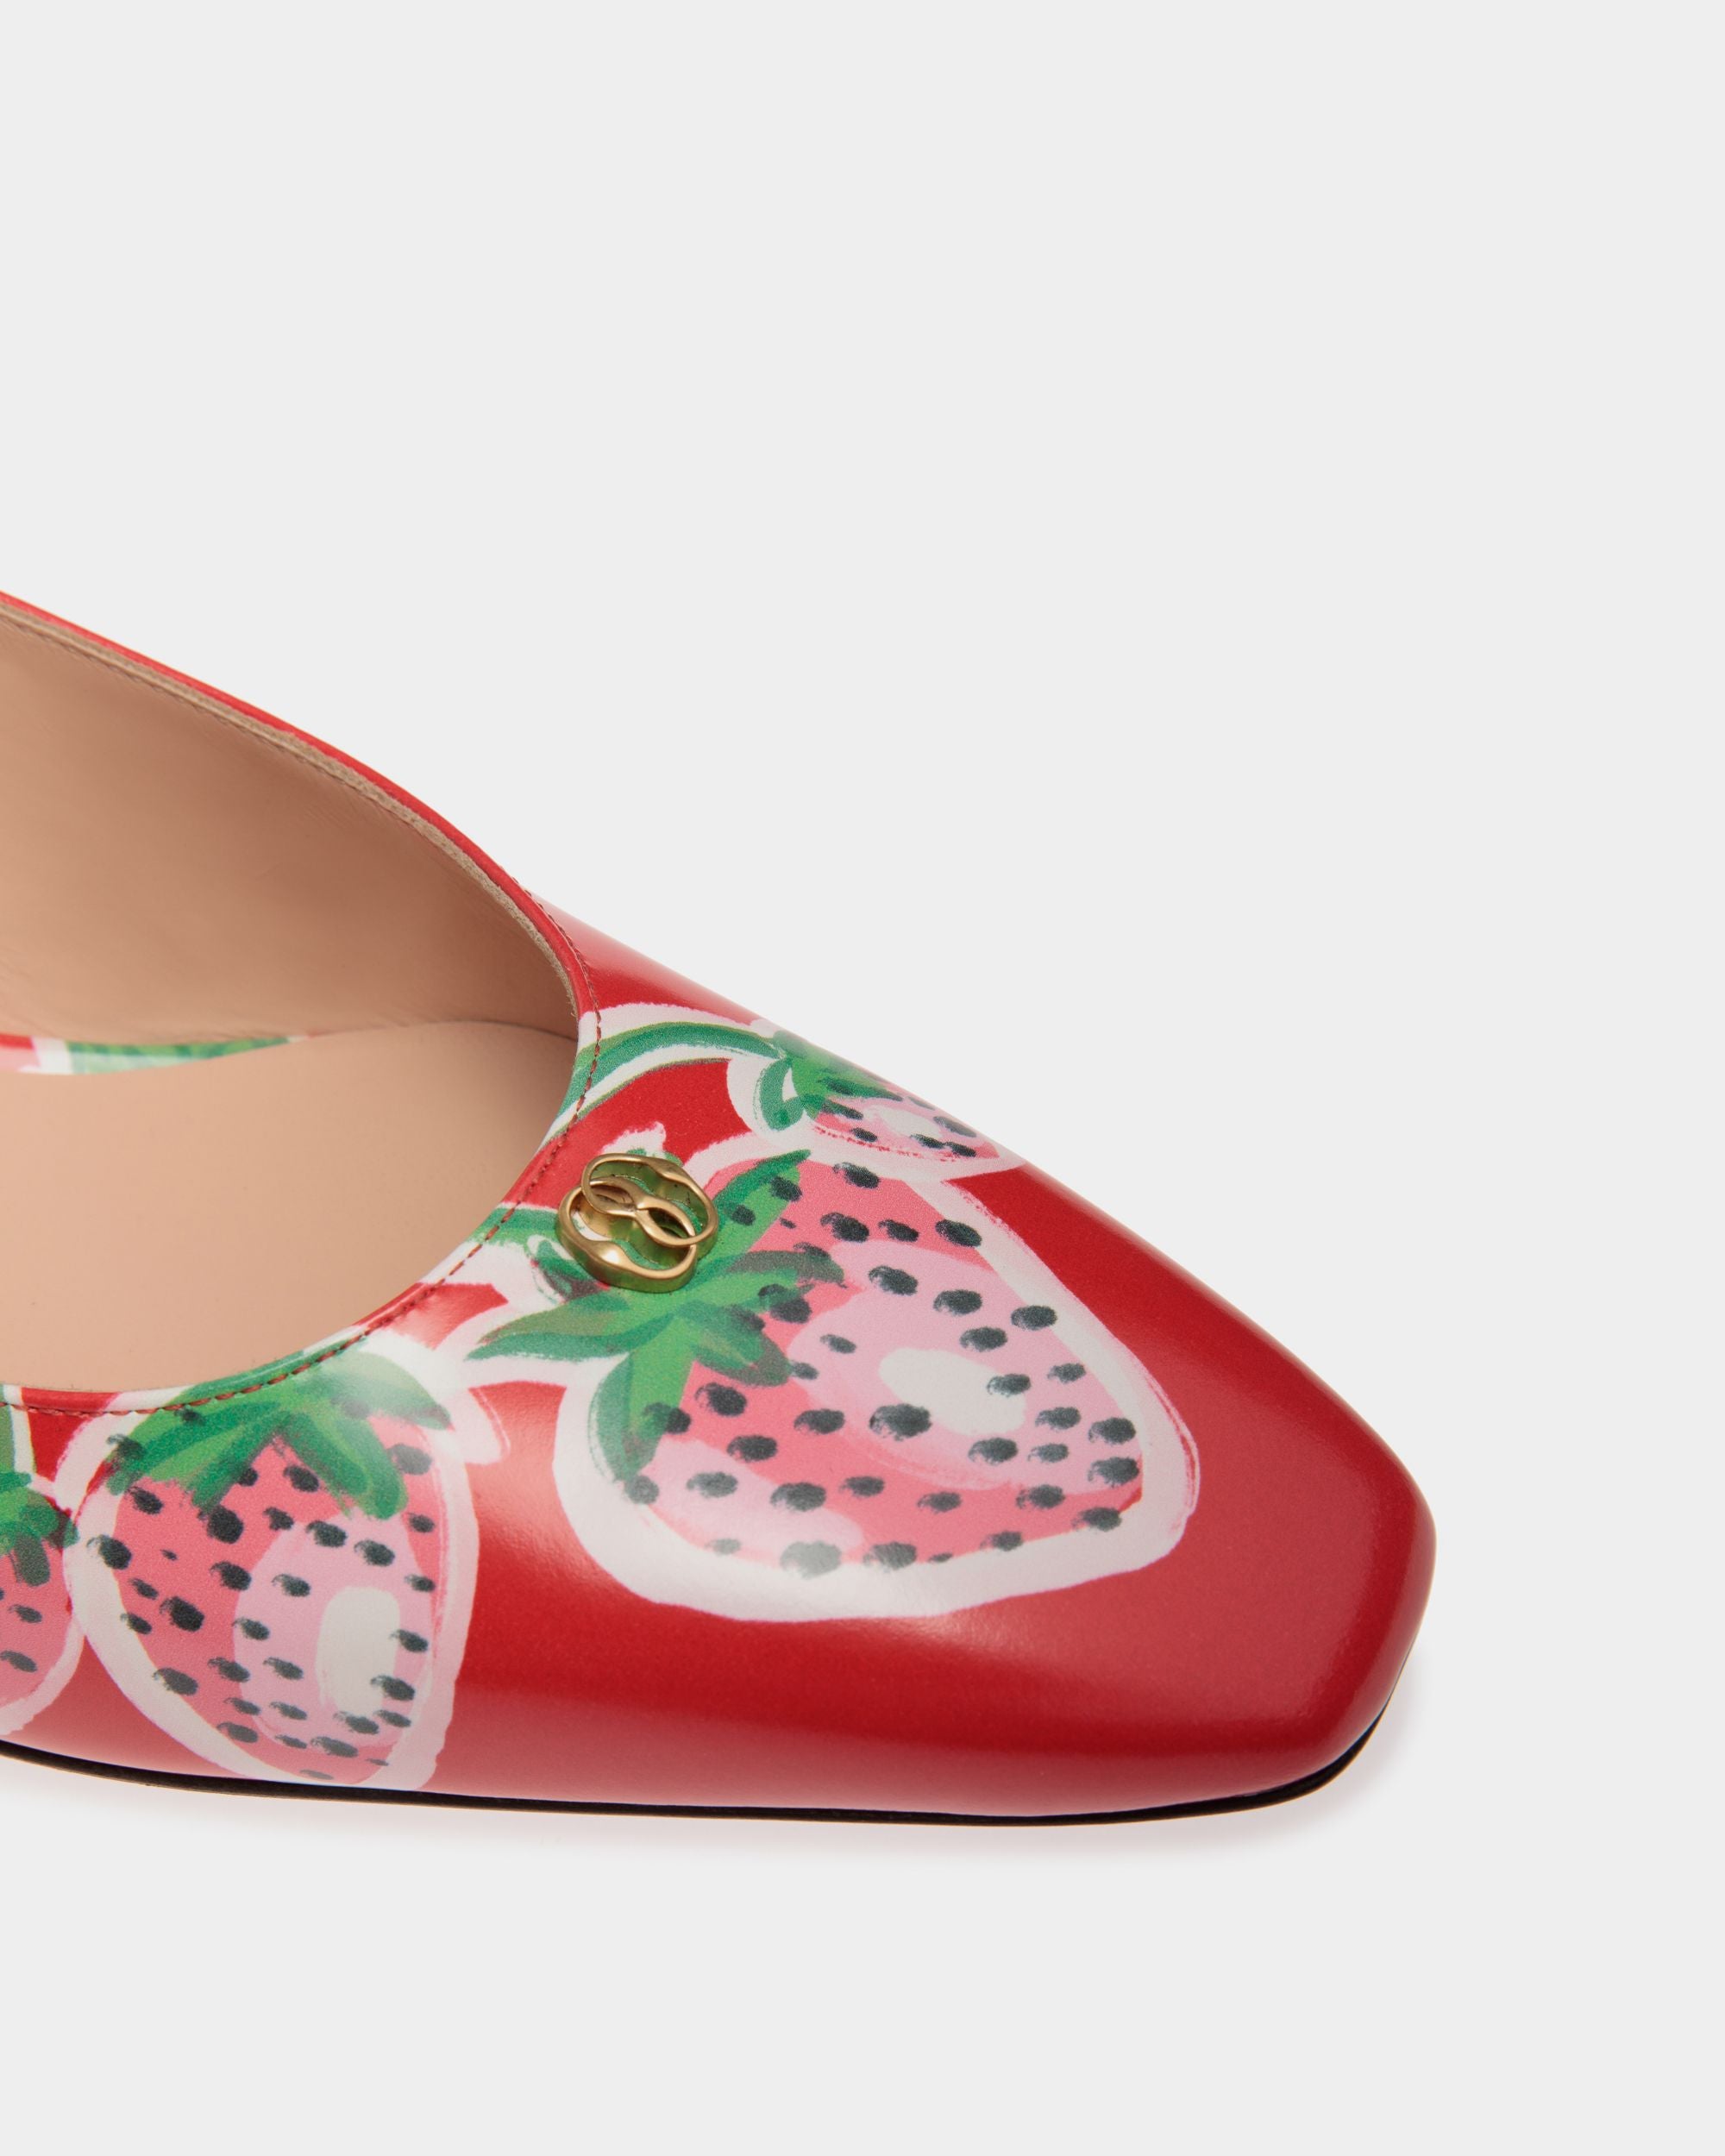 Sylt | Women's Slingback Pump in Strawberry Print Brushed Leather | Bally | Still Life Detail